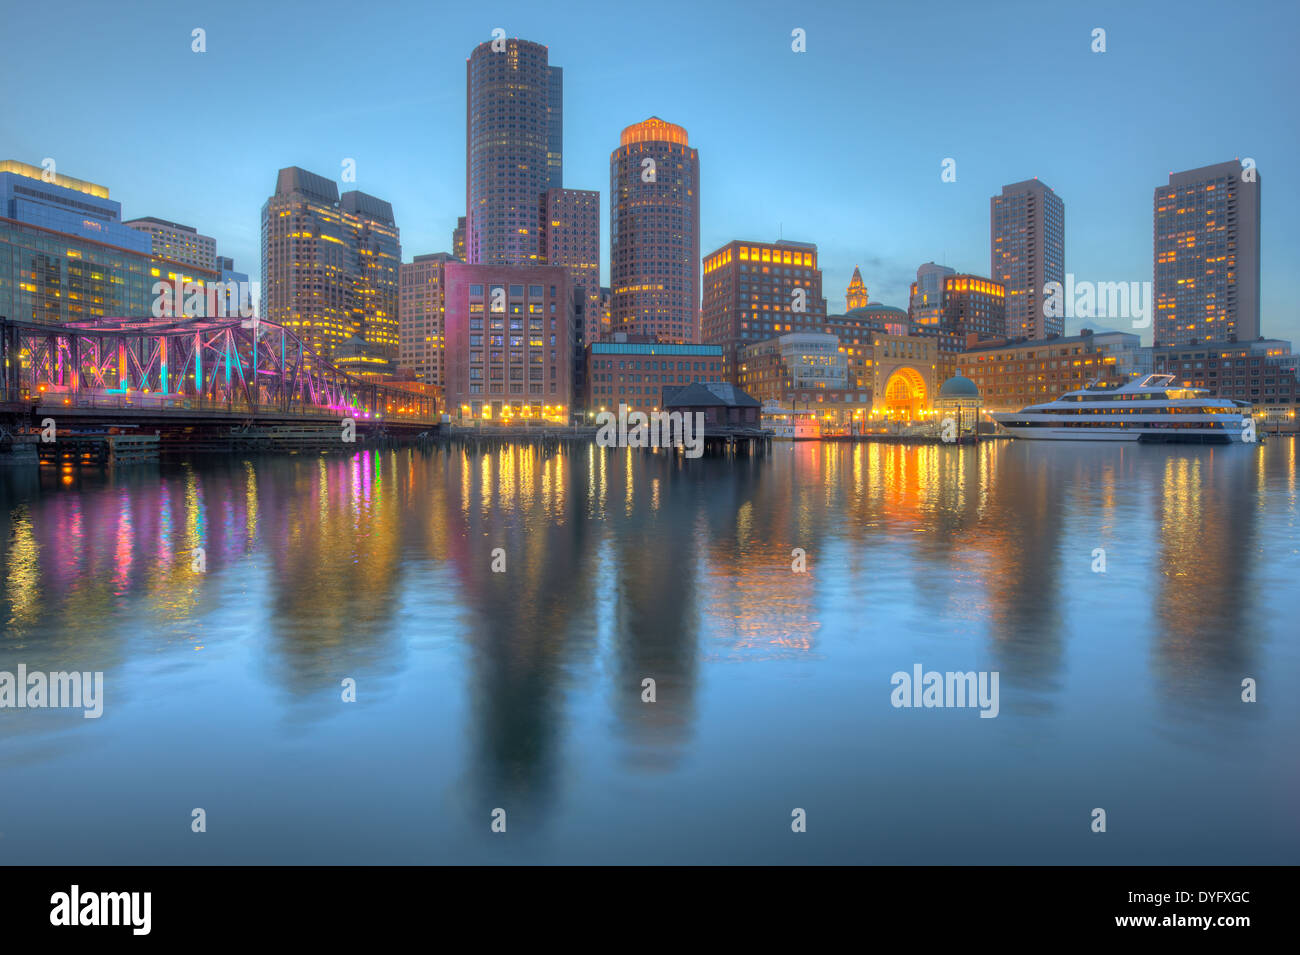 The skyline is illuminated and reflected off the waters of the harbor as twilight descends on Boston, Massachusetts. Stock Photo